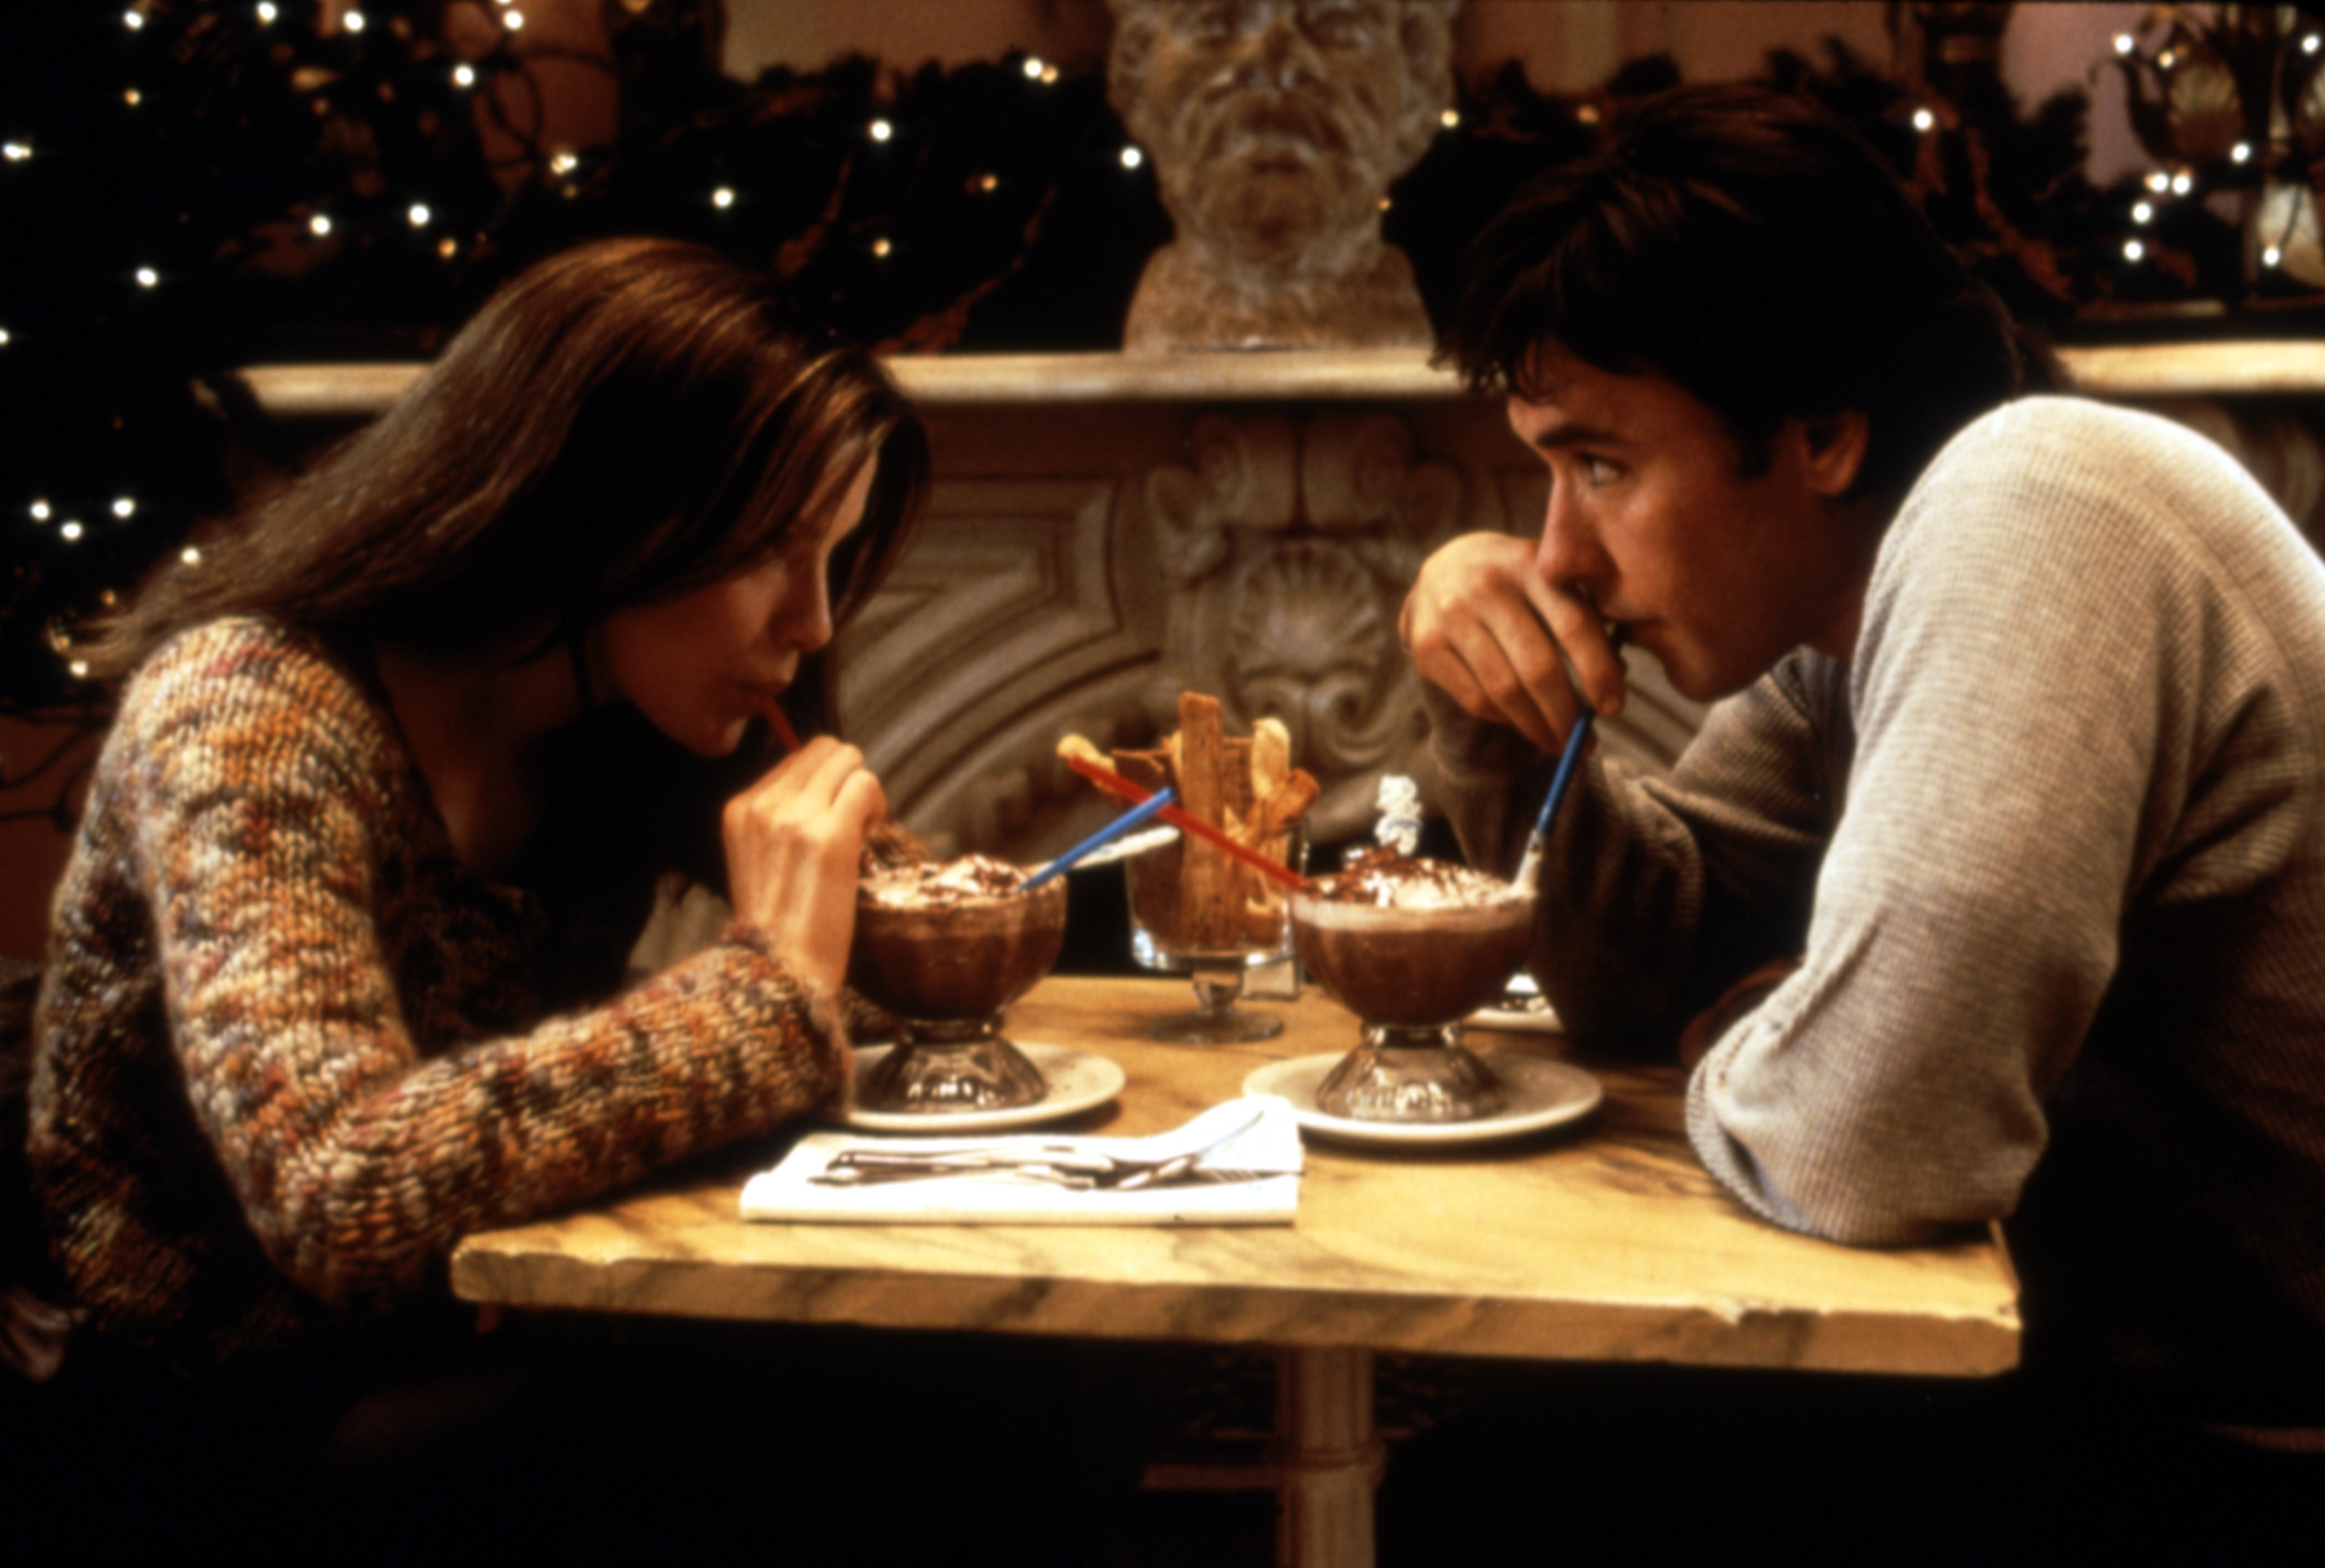 kate beckinsale and john cusack drinking hot chocolate out of straws